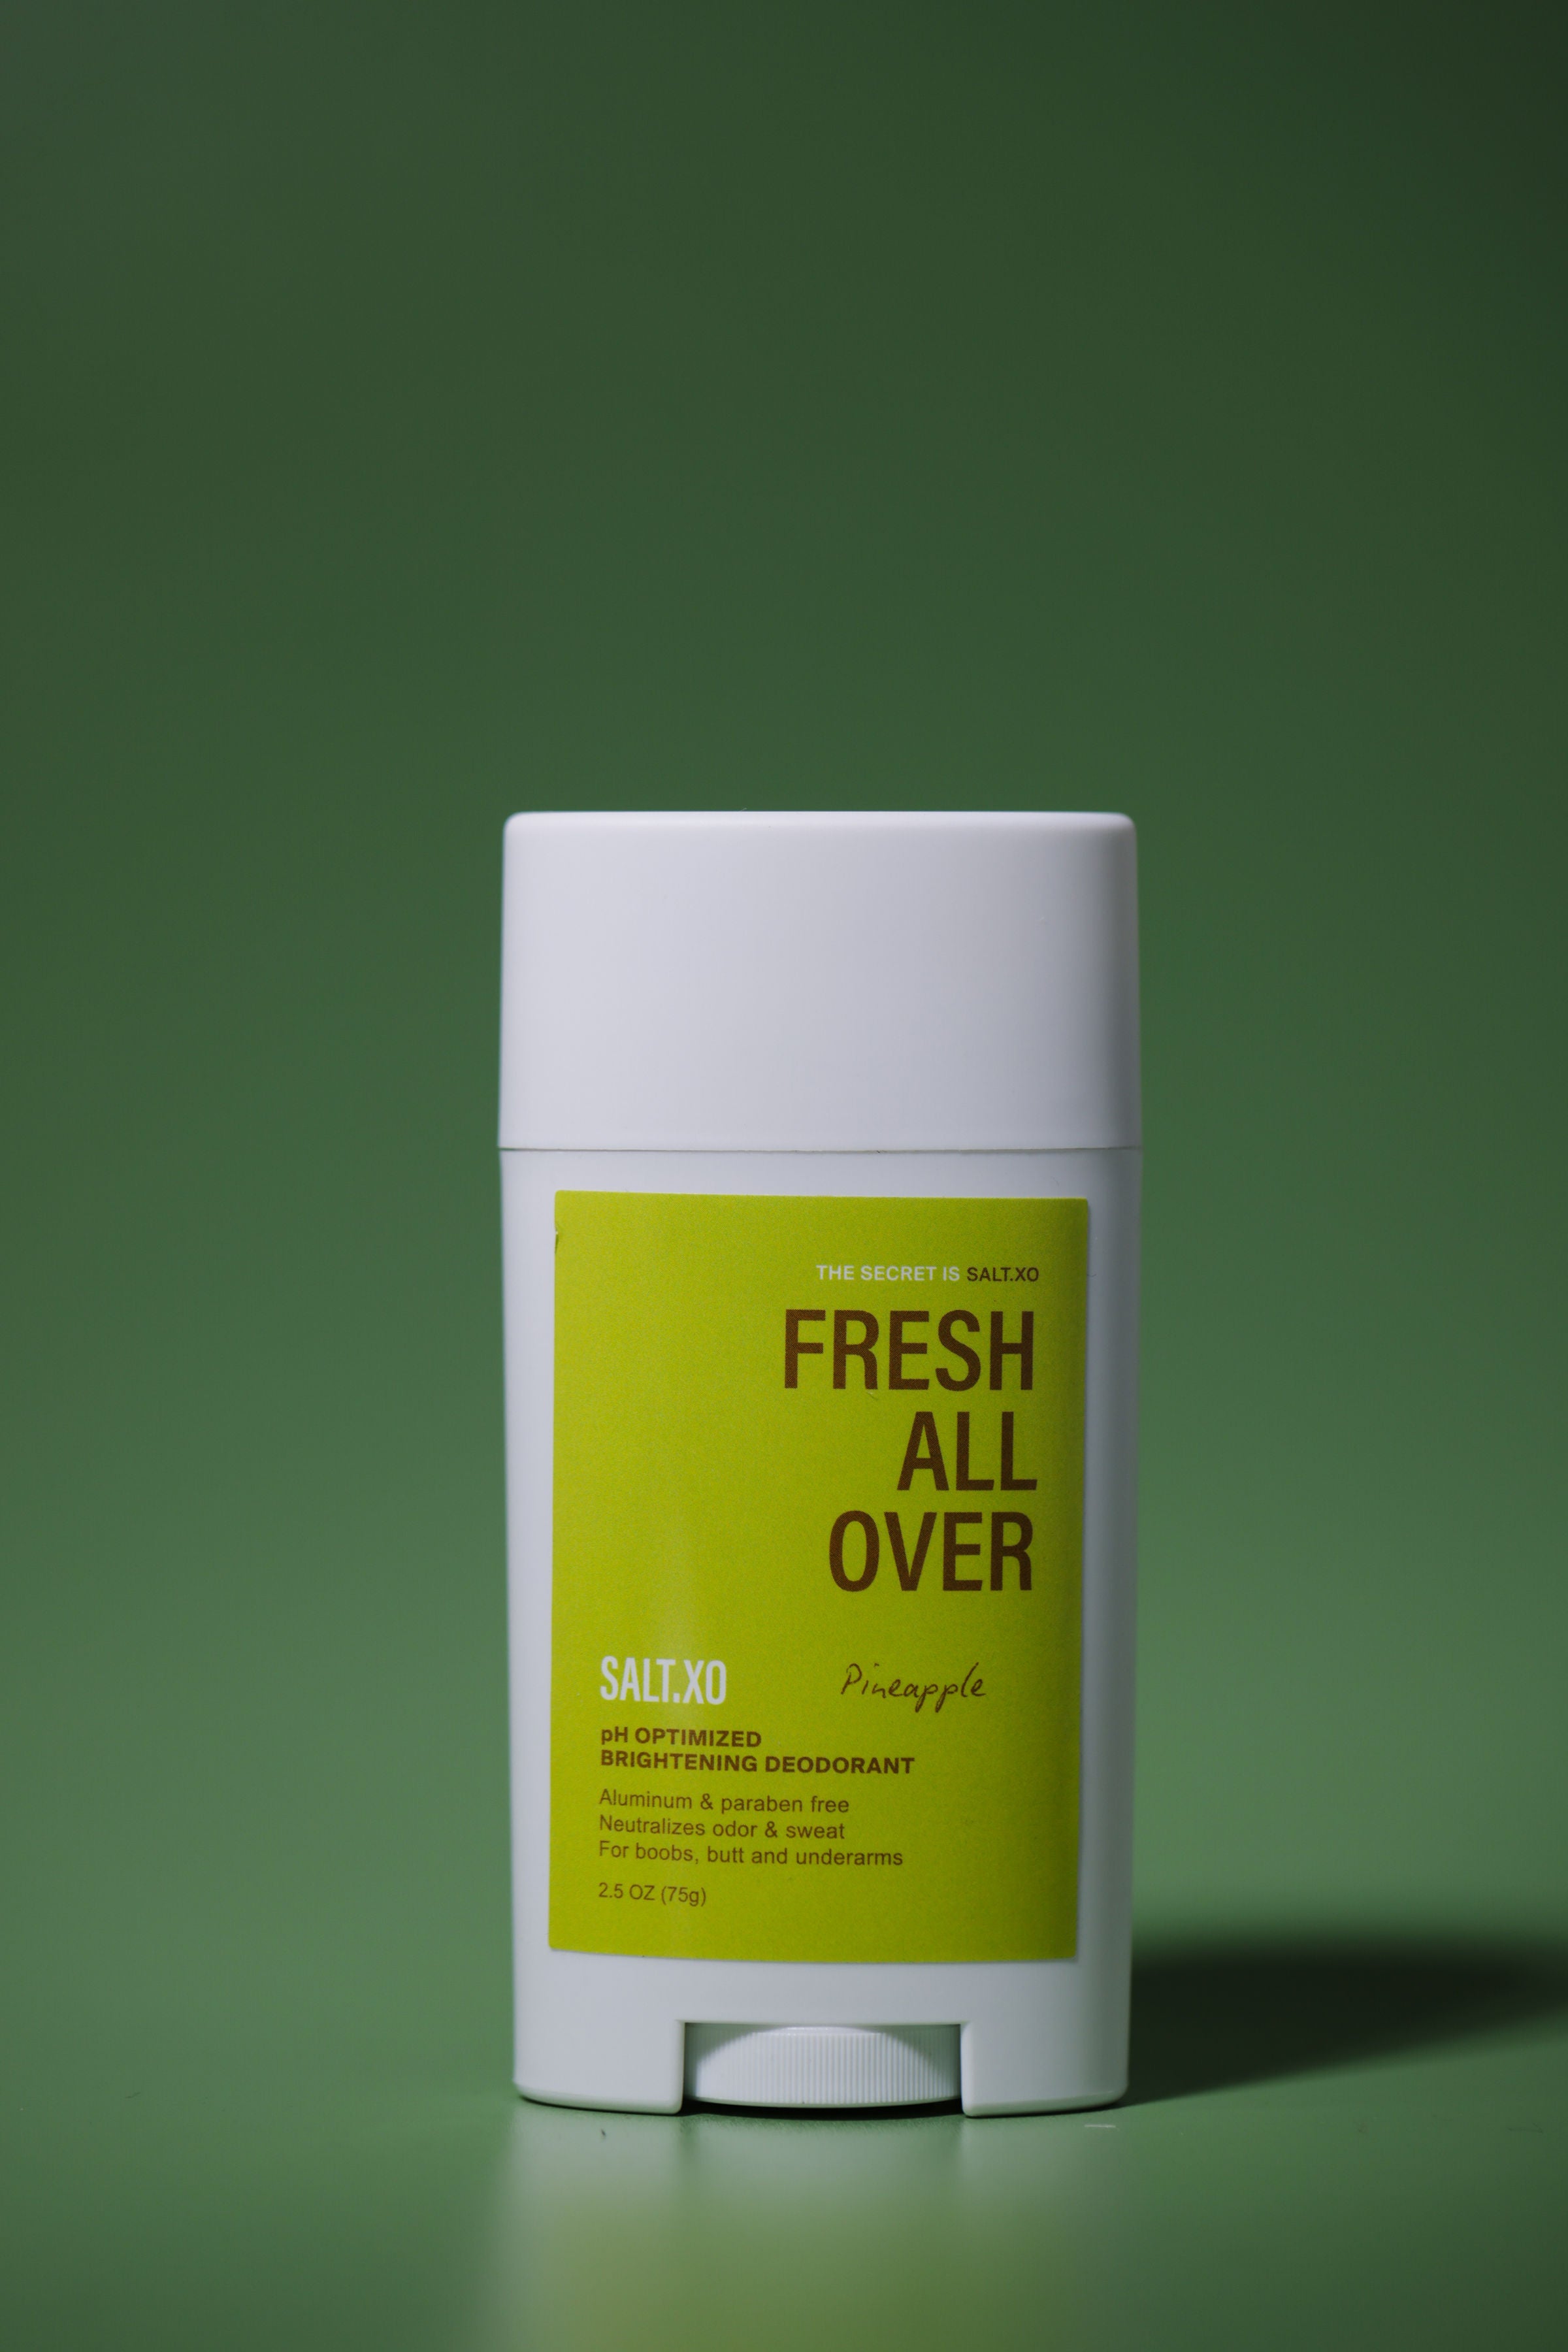 Native Launches Whole Body Deodorant for All-Day, All-Over Freshness